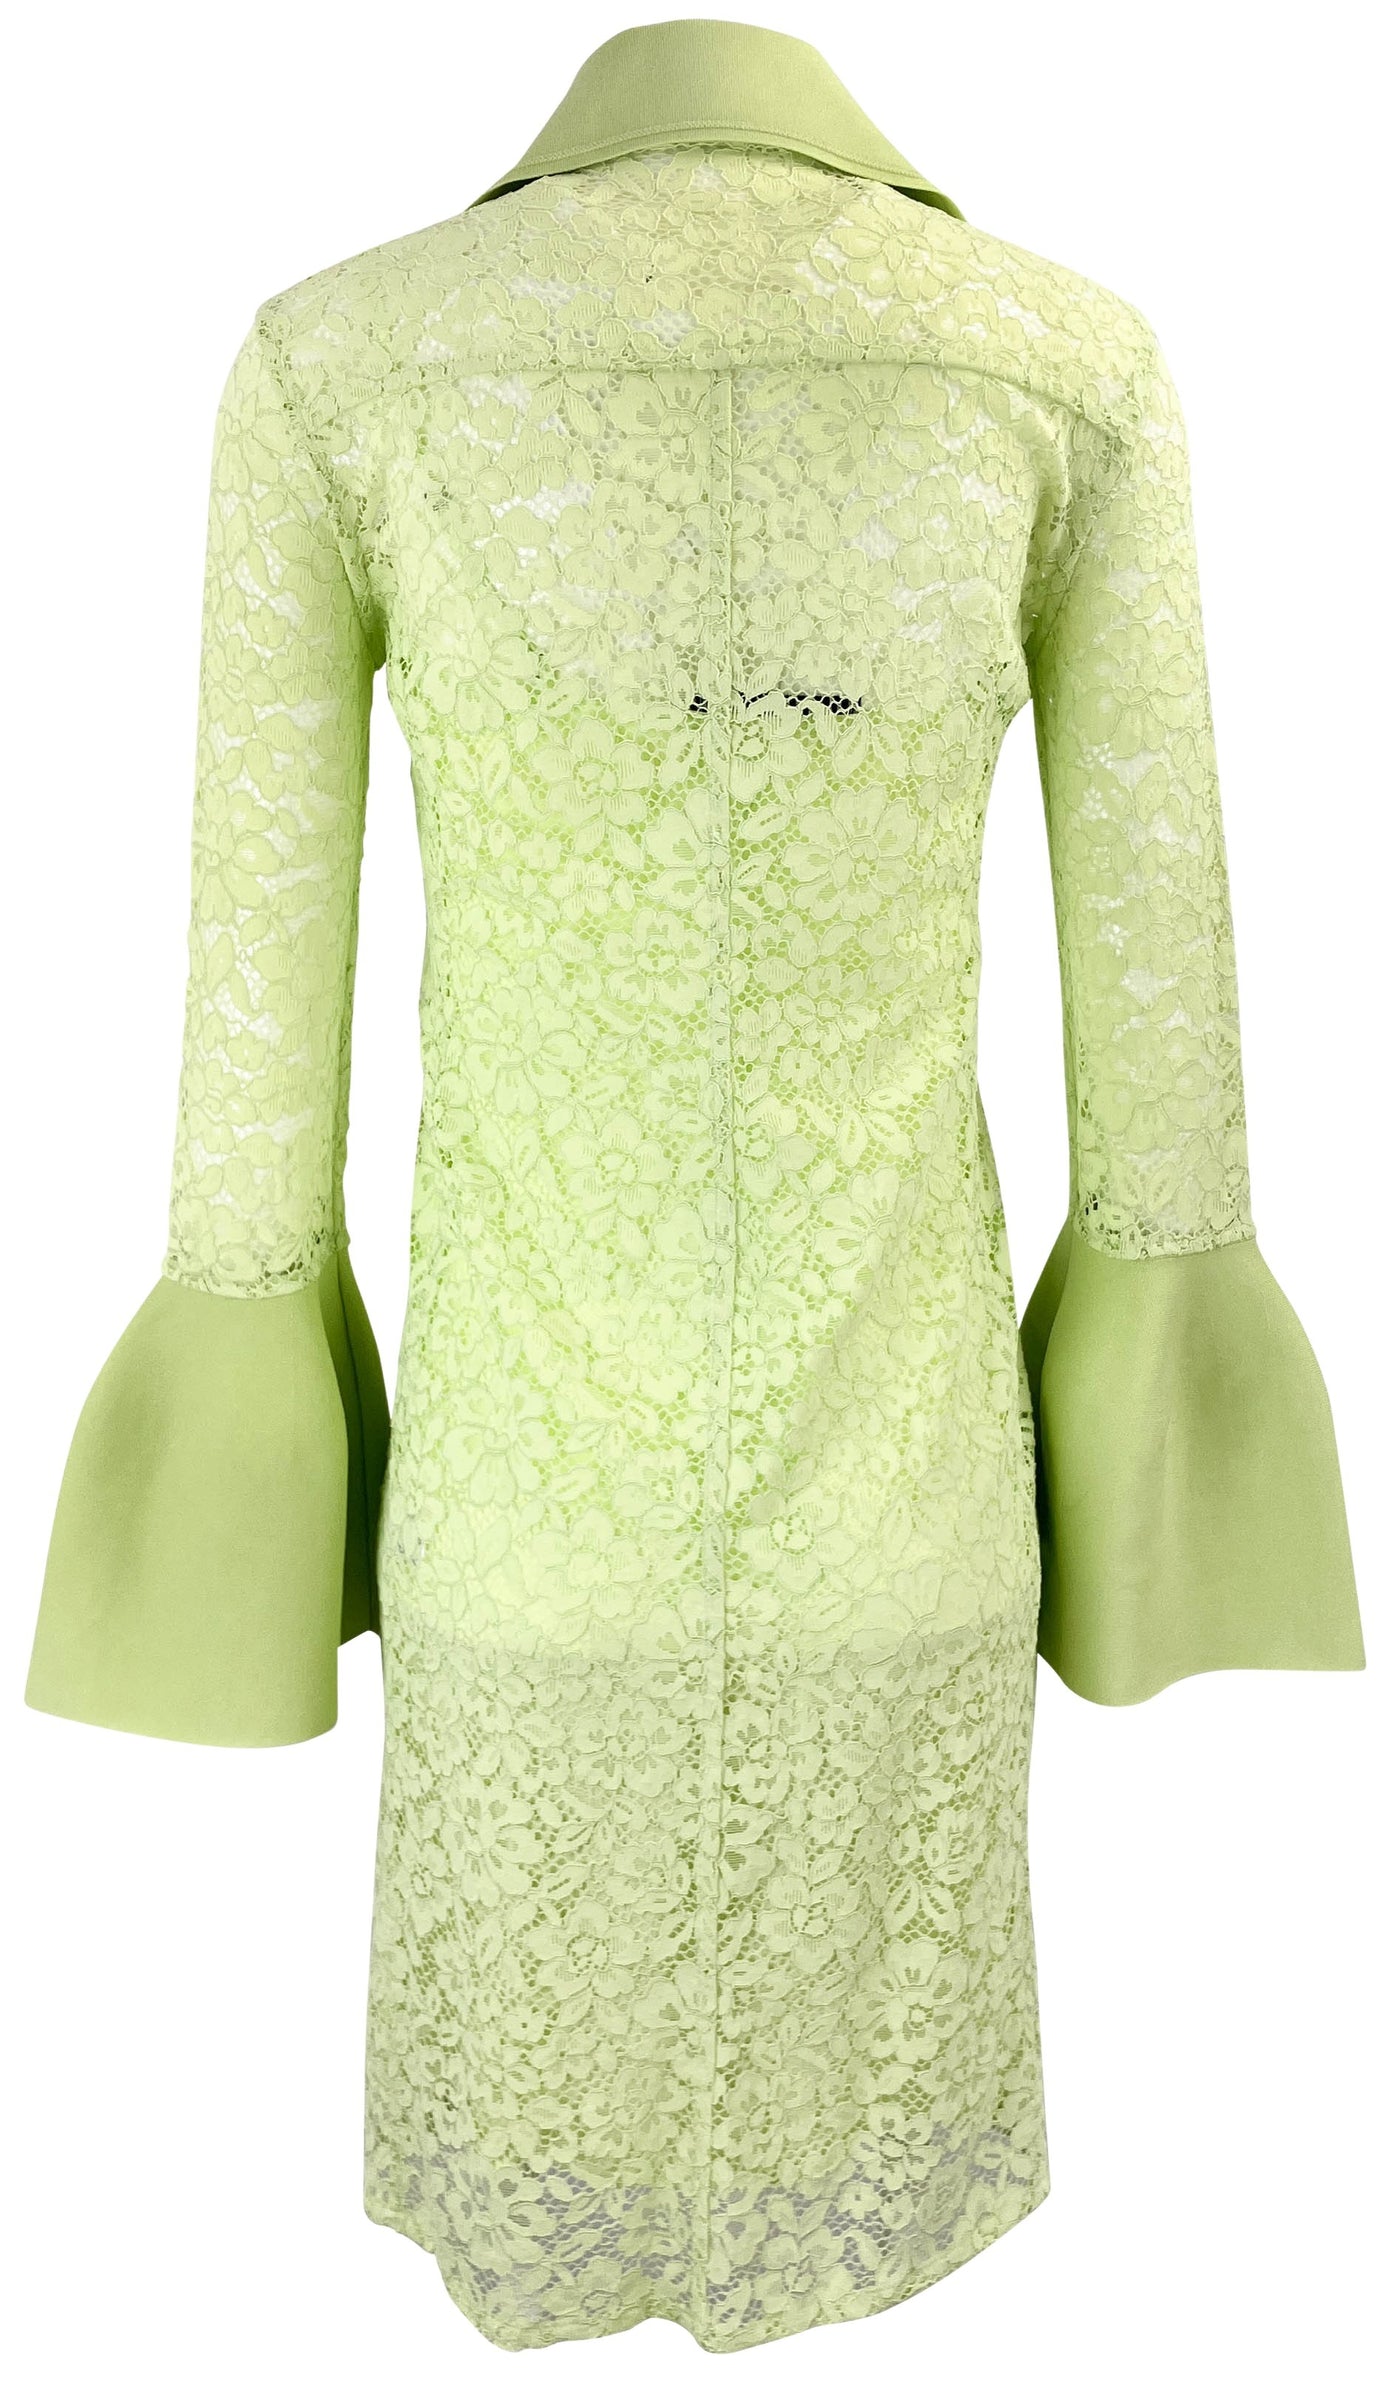 Proenza Schouler Floral Lace Shirt Dress in Lime - Discounts on Proenza Schouler at UAL